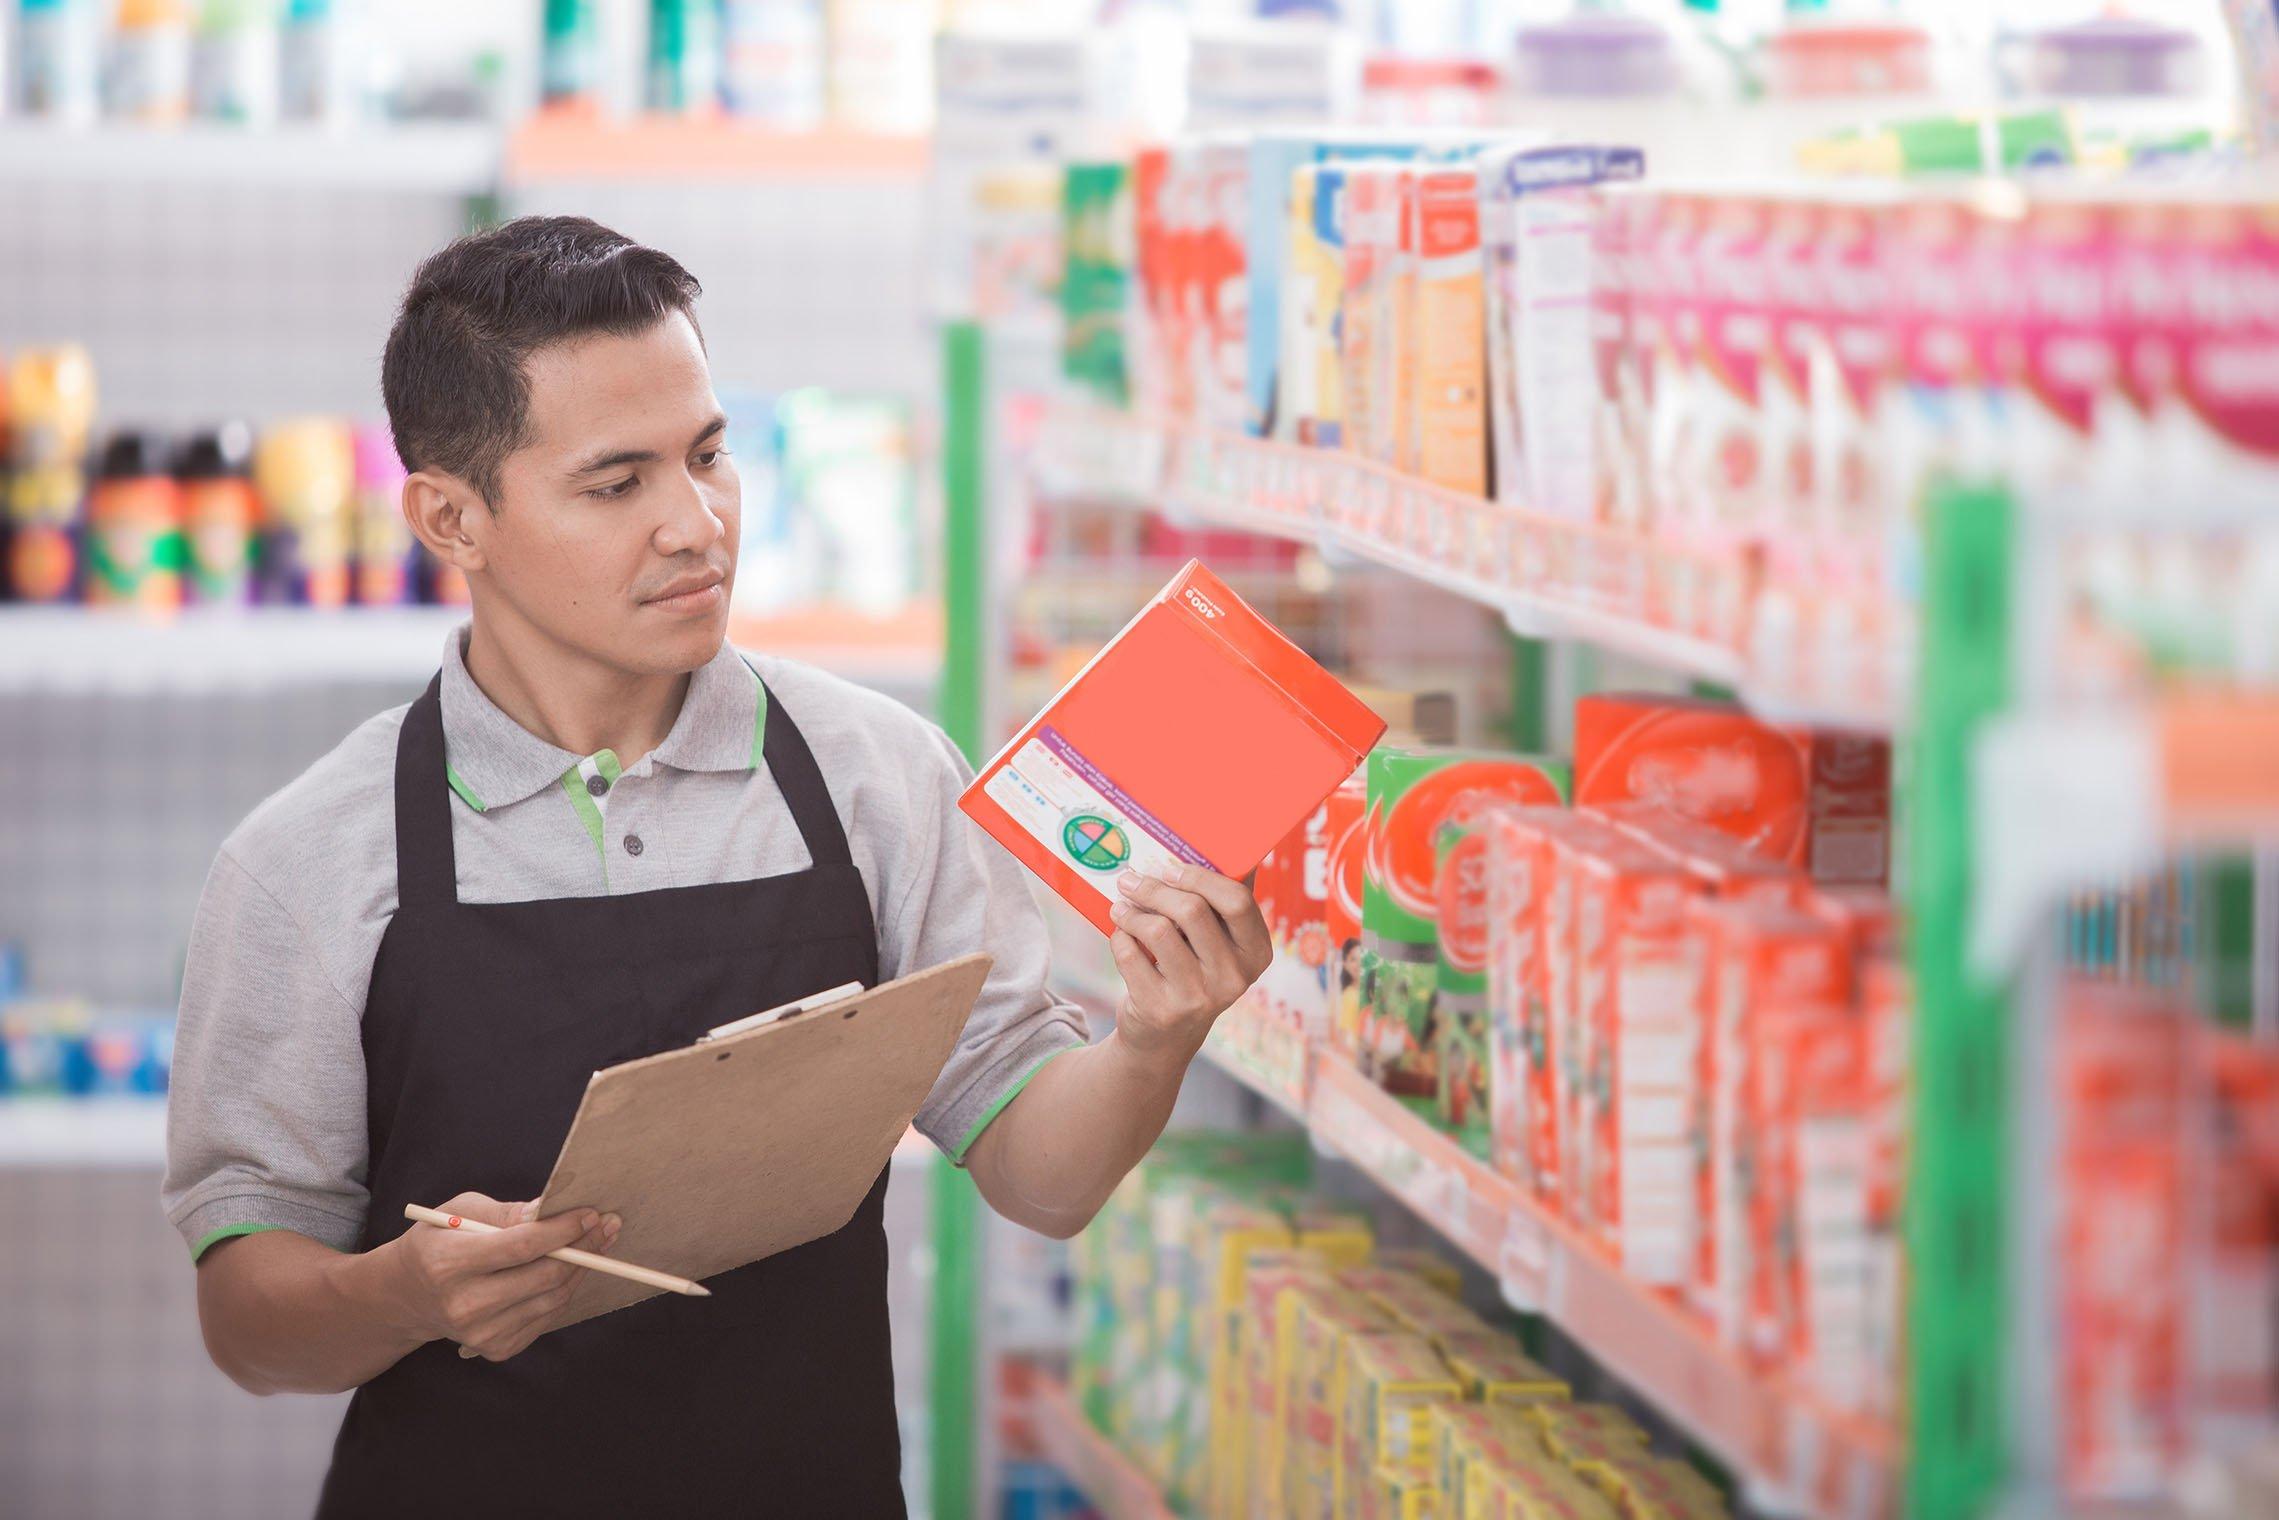 Retail store daily checklist for opening and closing: 5 vital steps